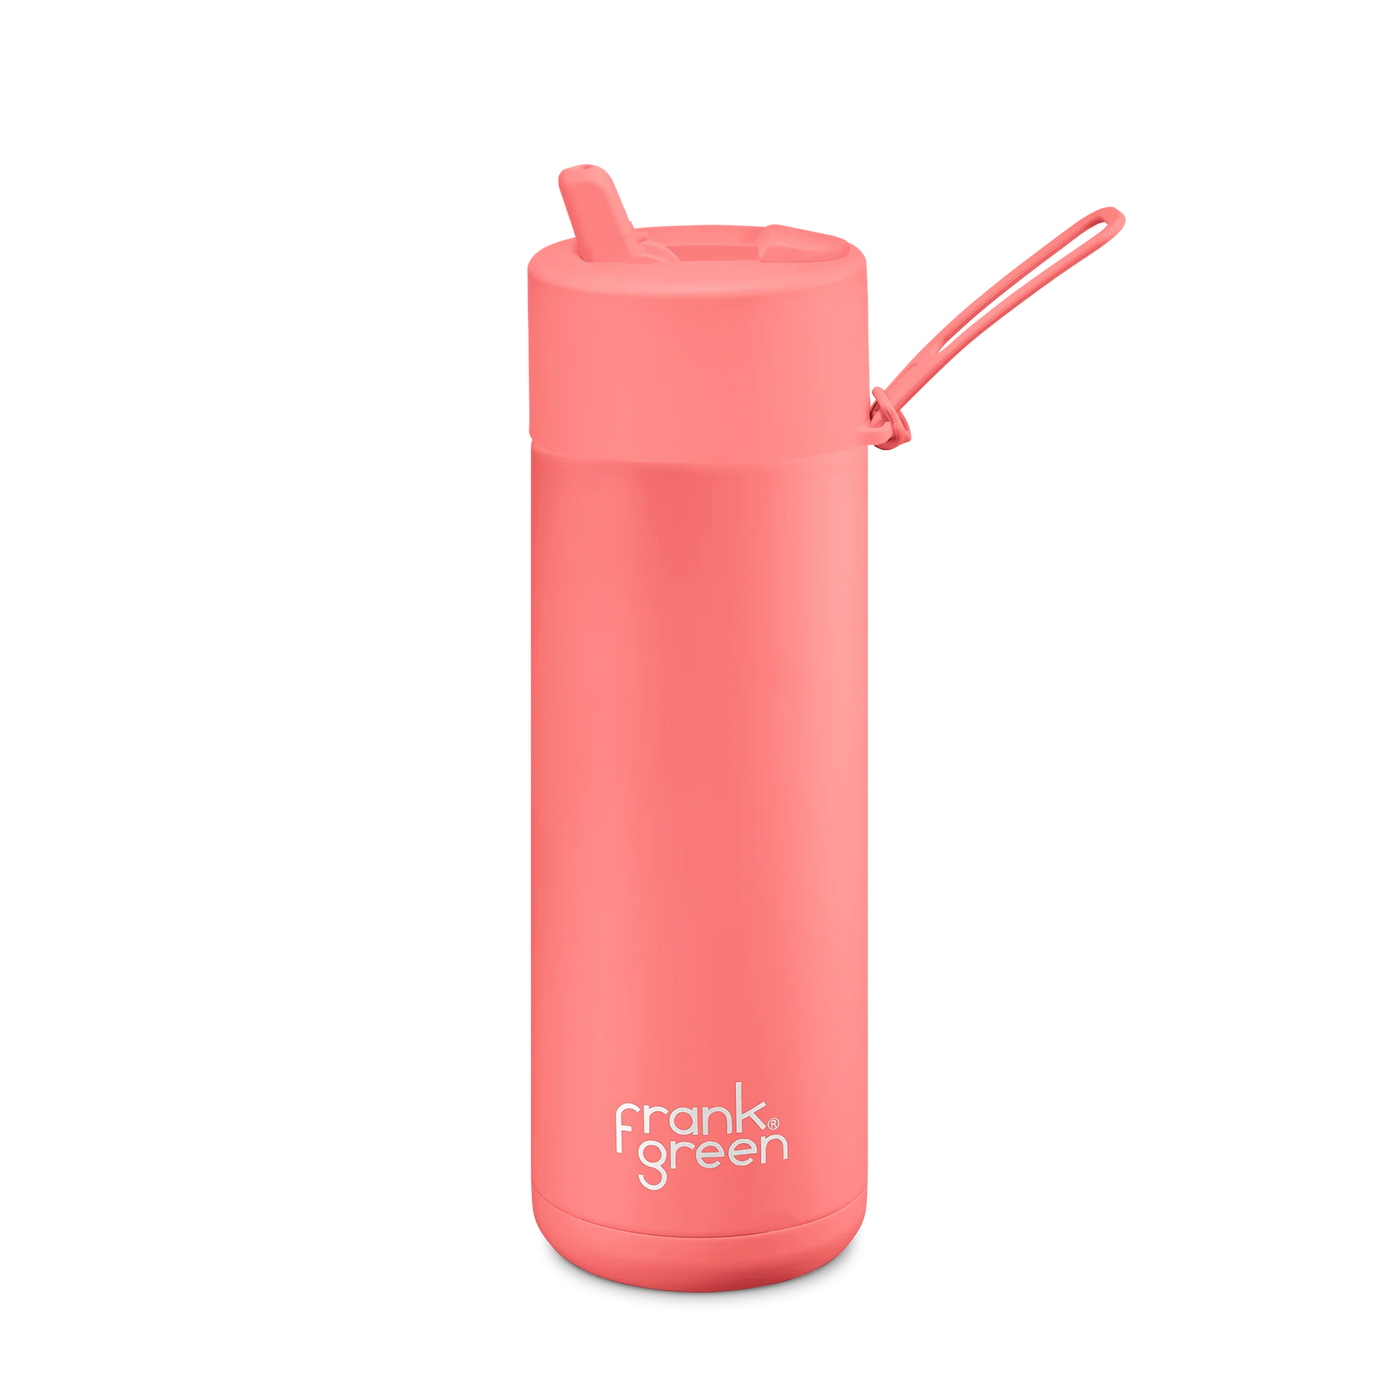 Frank Green Limited Edition Ceramic Reusable Bottle 20oz/595ML - Sweet Peach Mealtime Frank Green 